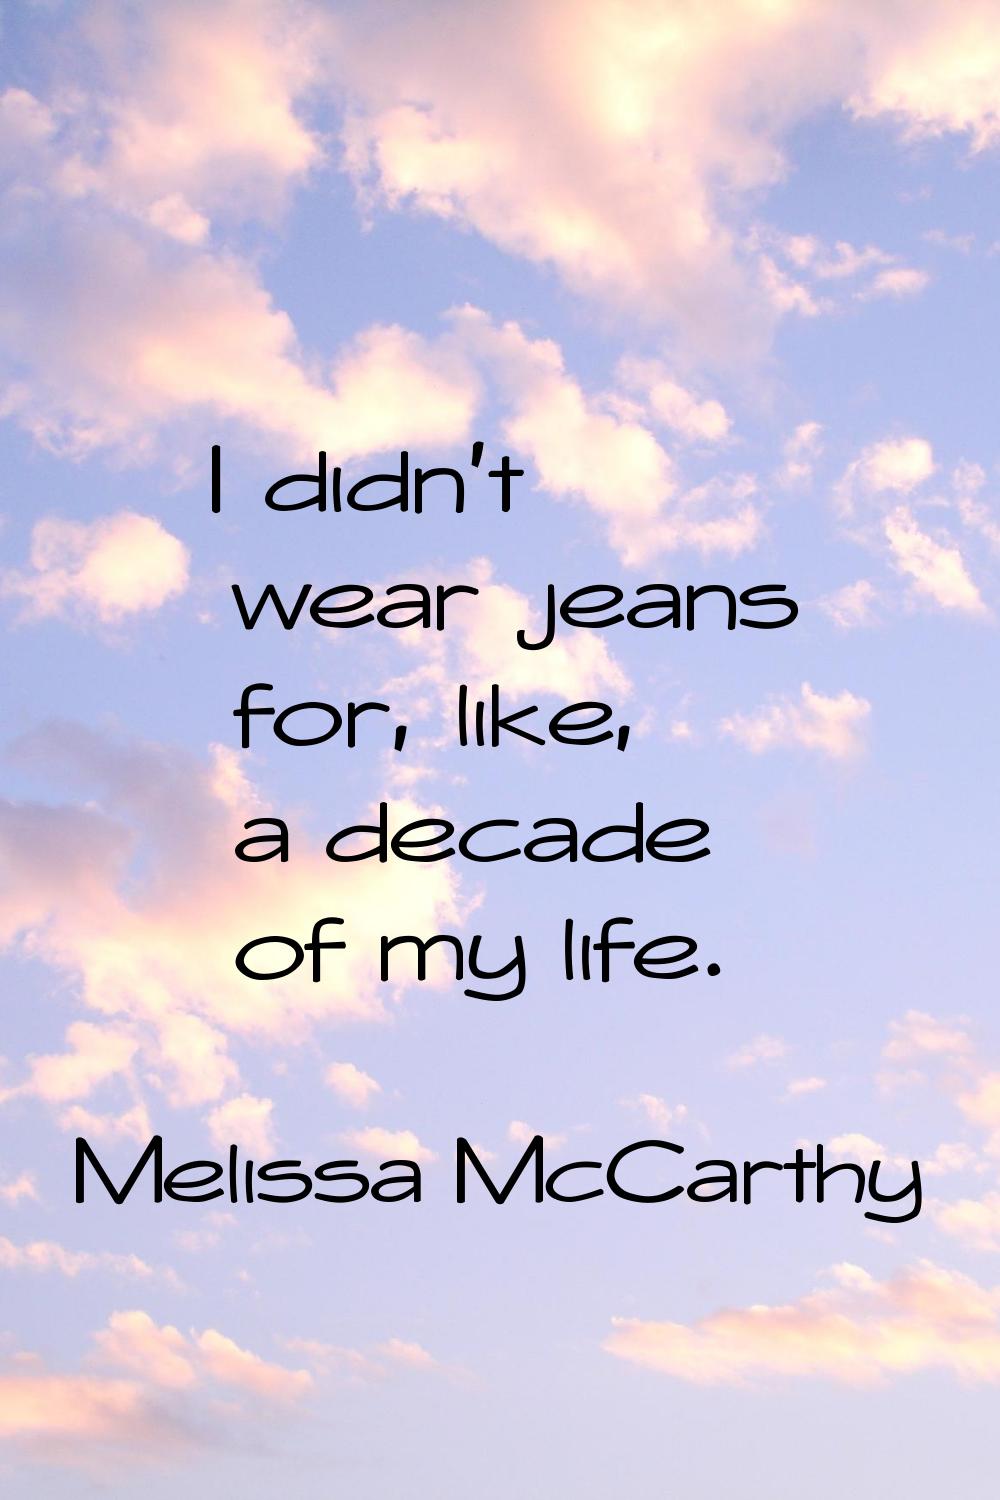 I didn't wear jeans for, like, a decade of my life.